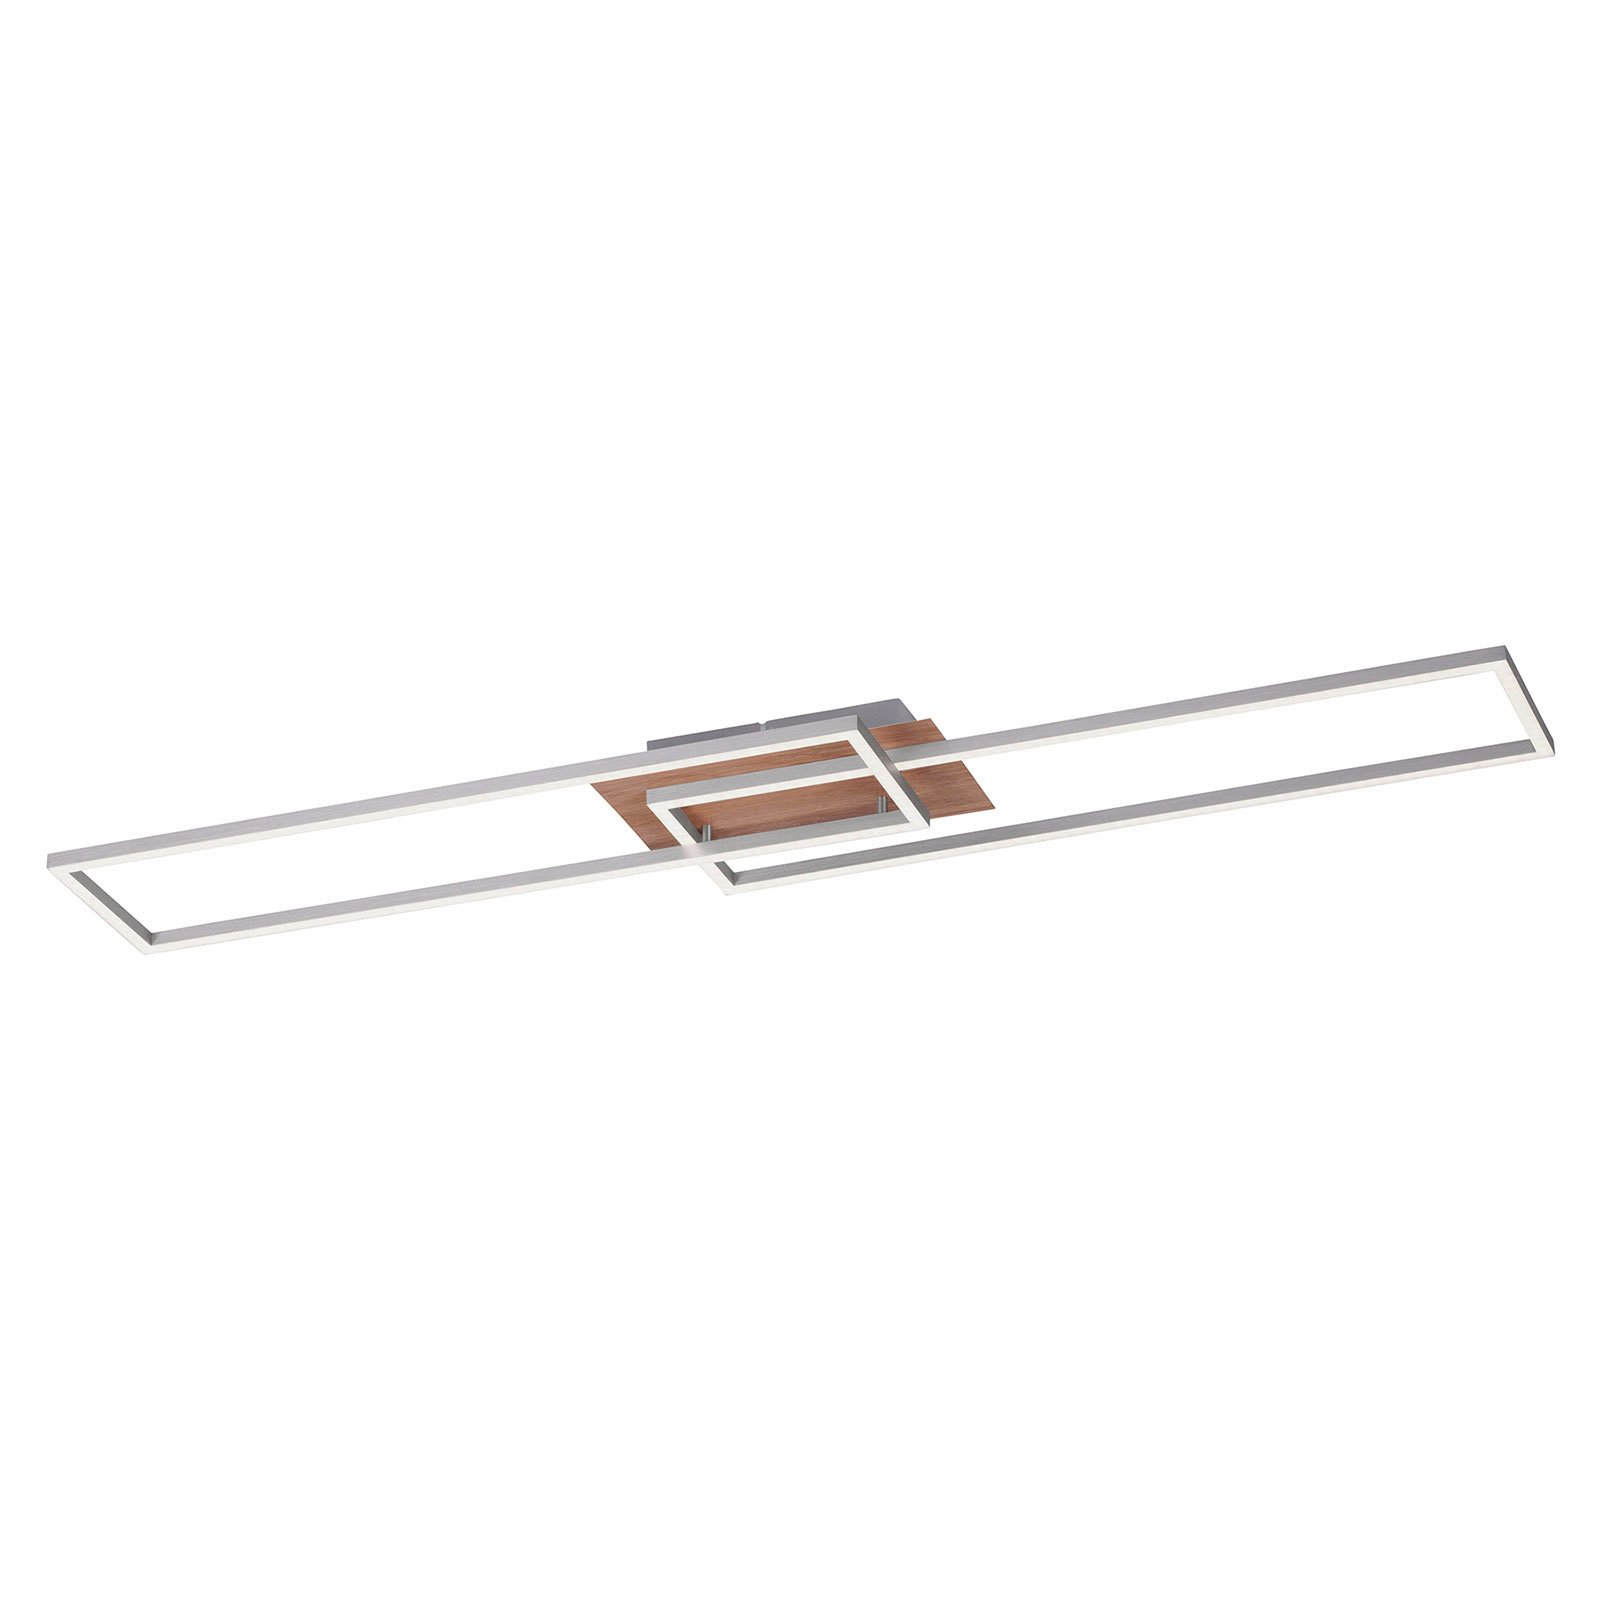 LED plafondlamp Iven, dim, staal/hout, 110x25cm